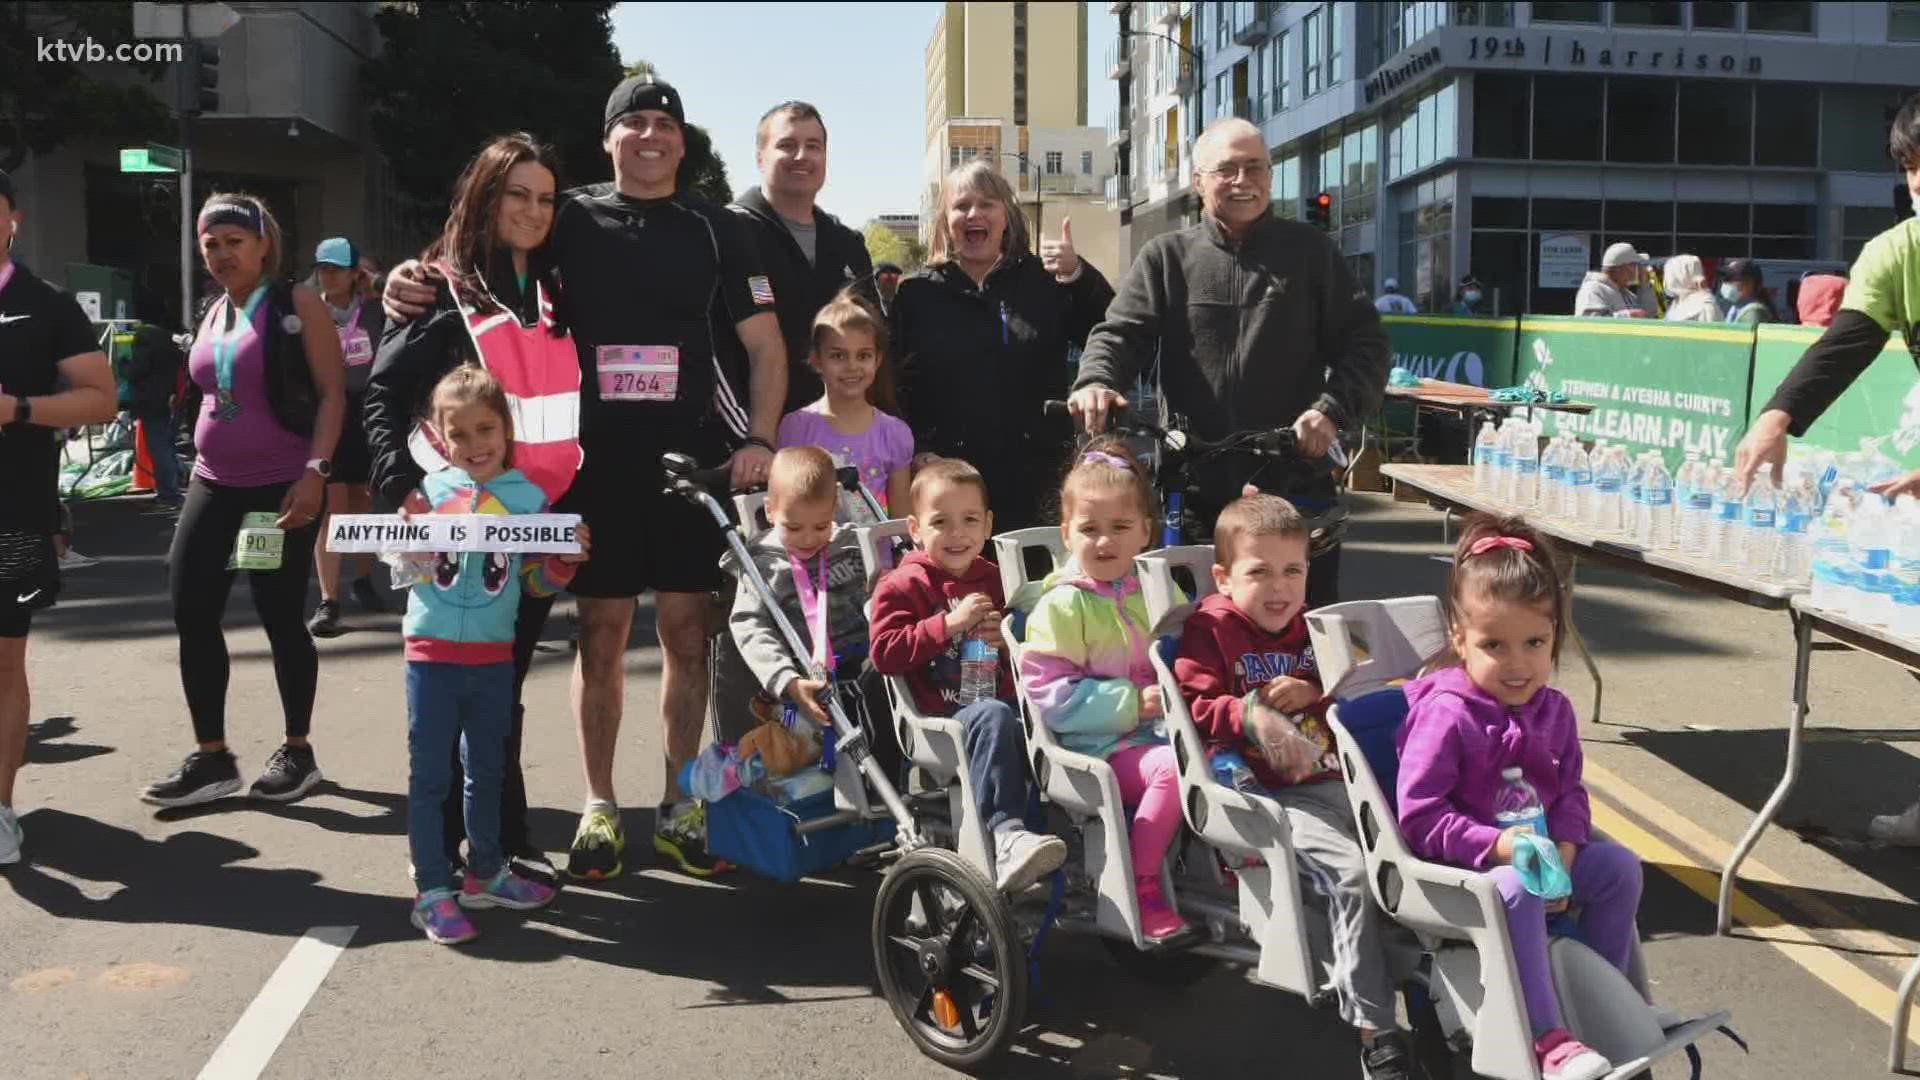 Chad Kempel ran the half marathon in 2 hours and 19 minutes while pushing his five youngest children in a stroller. Kempel is a father of seven children.